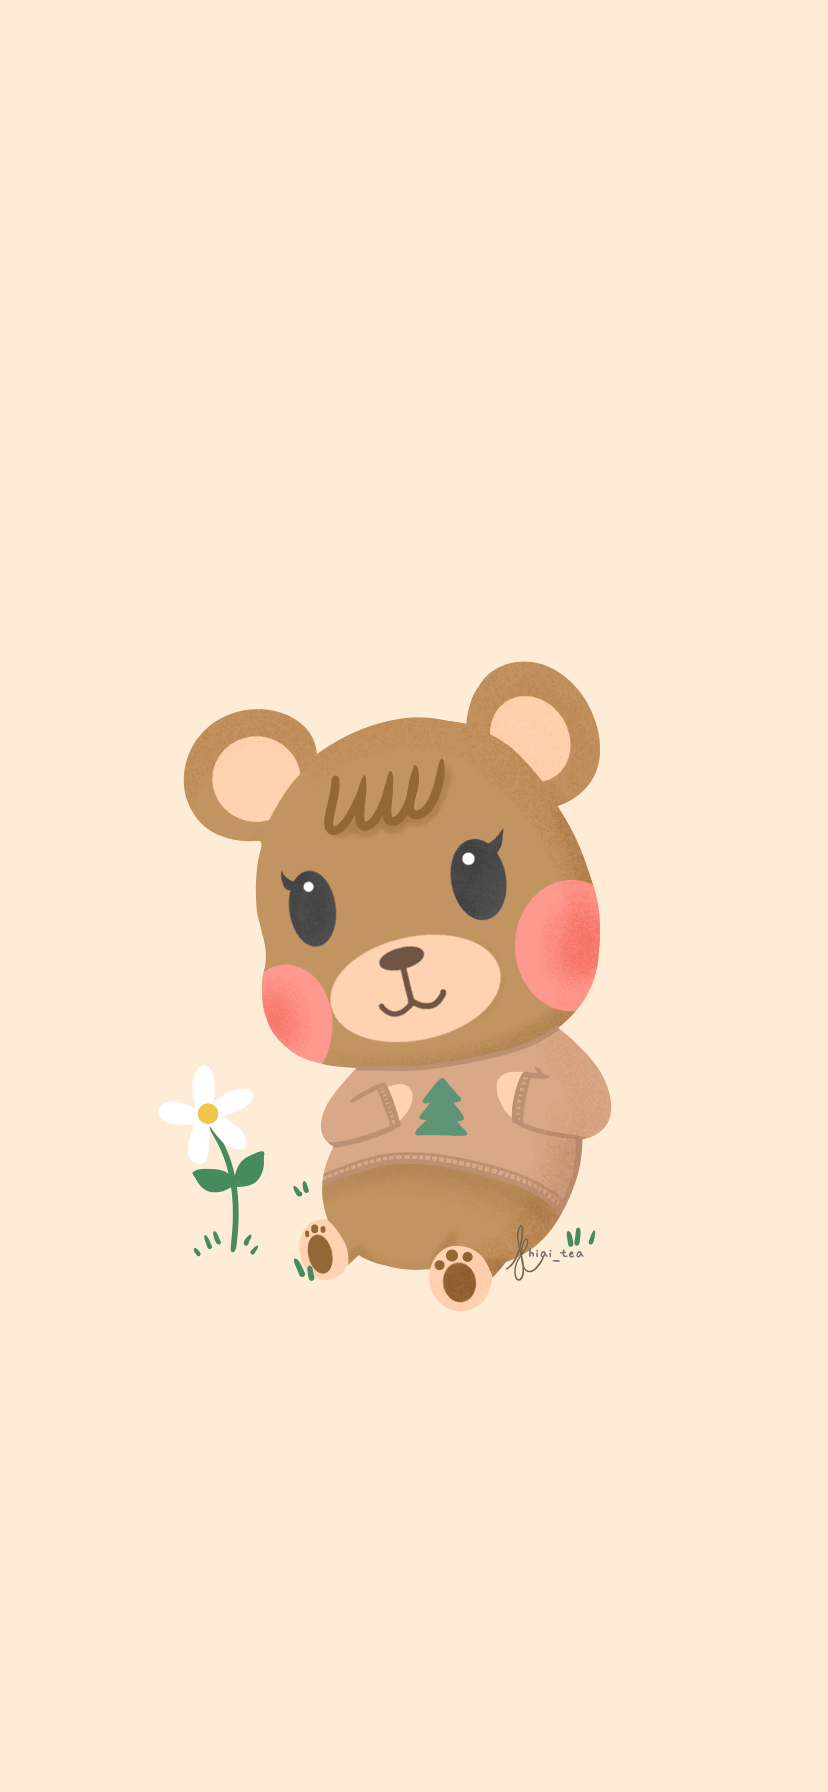 A cute little bear sitting on the ground - Animal Crossing